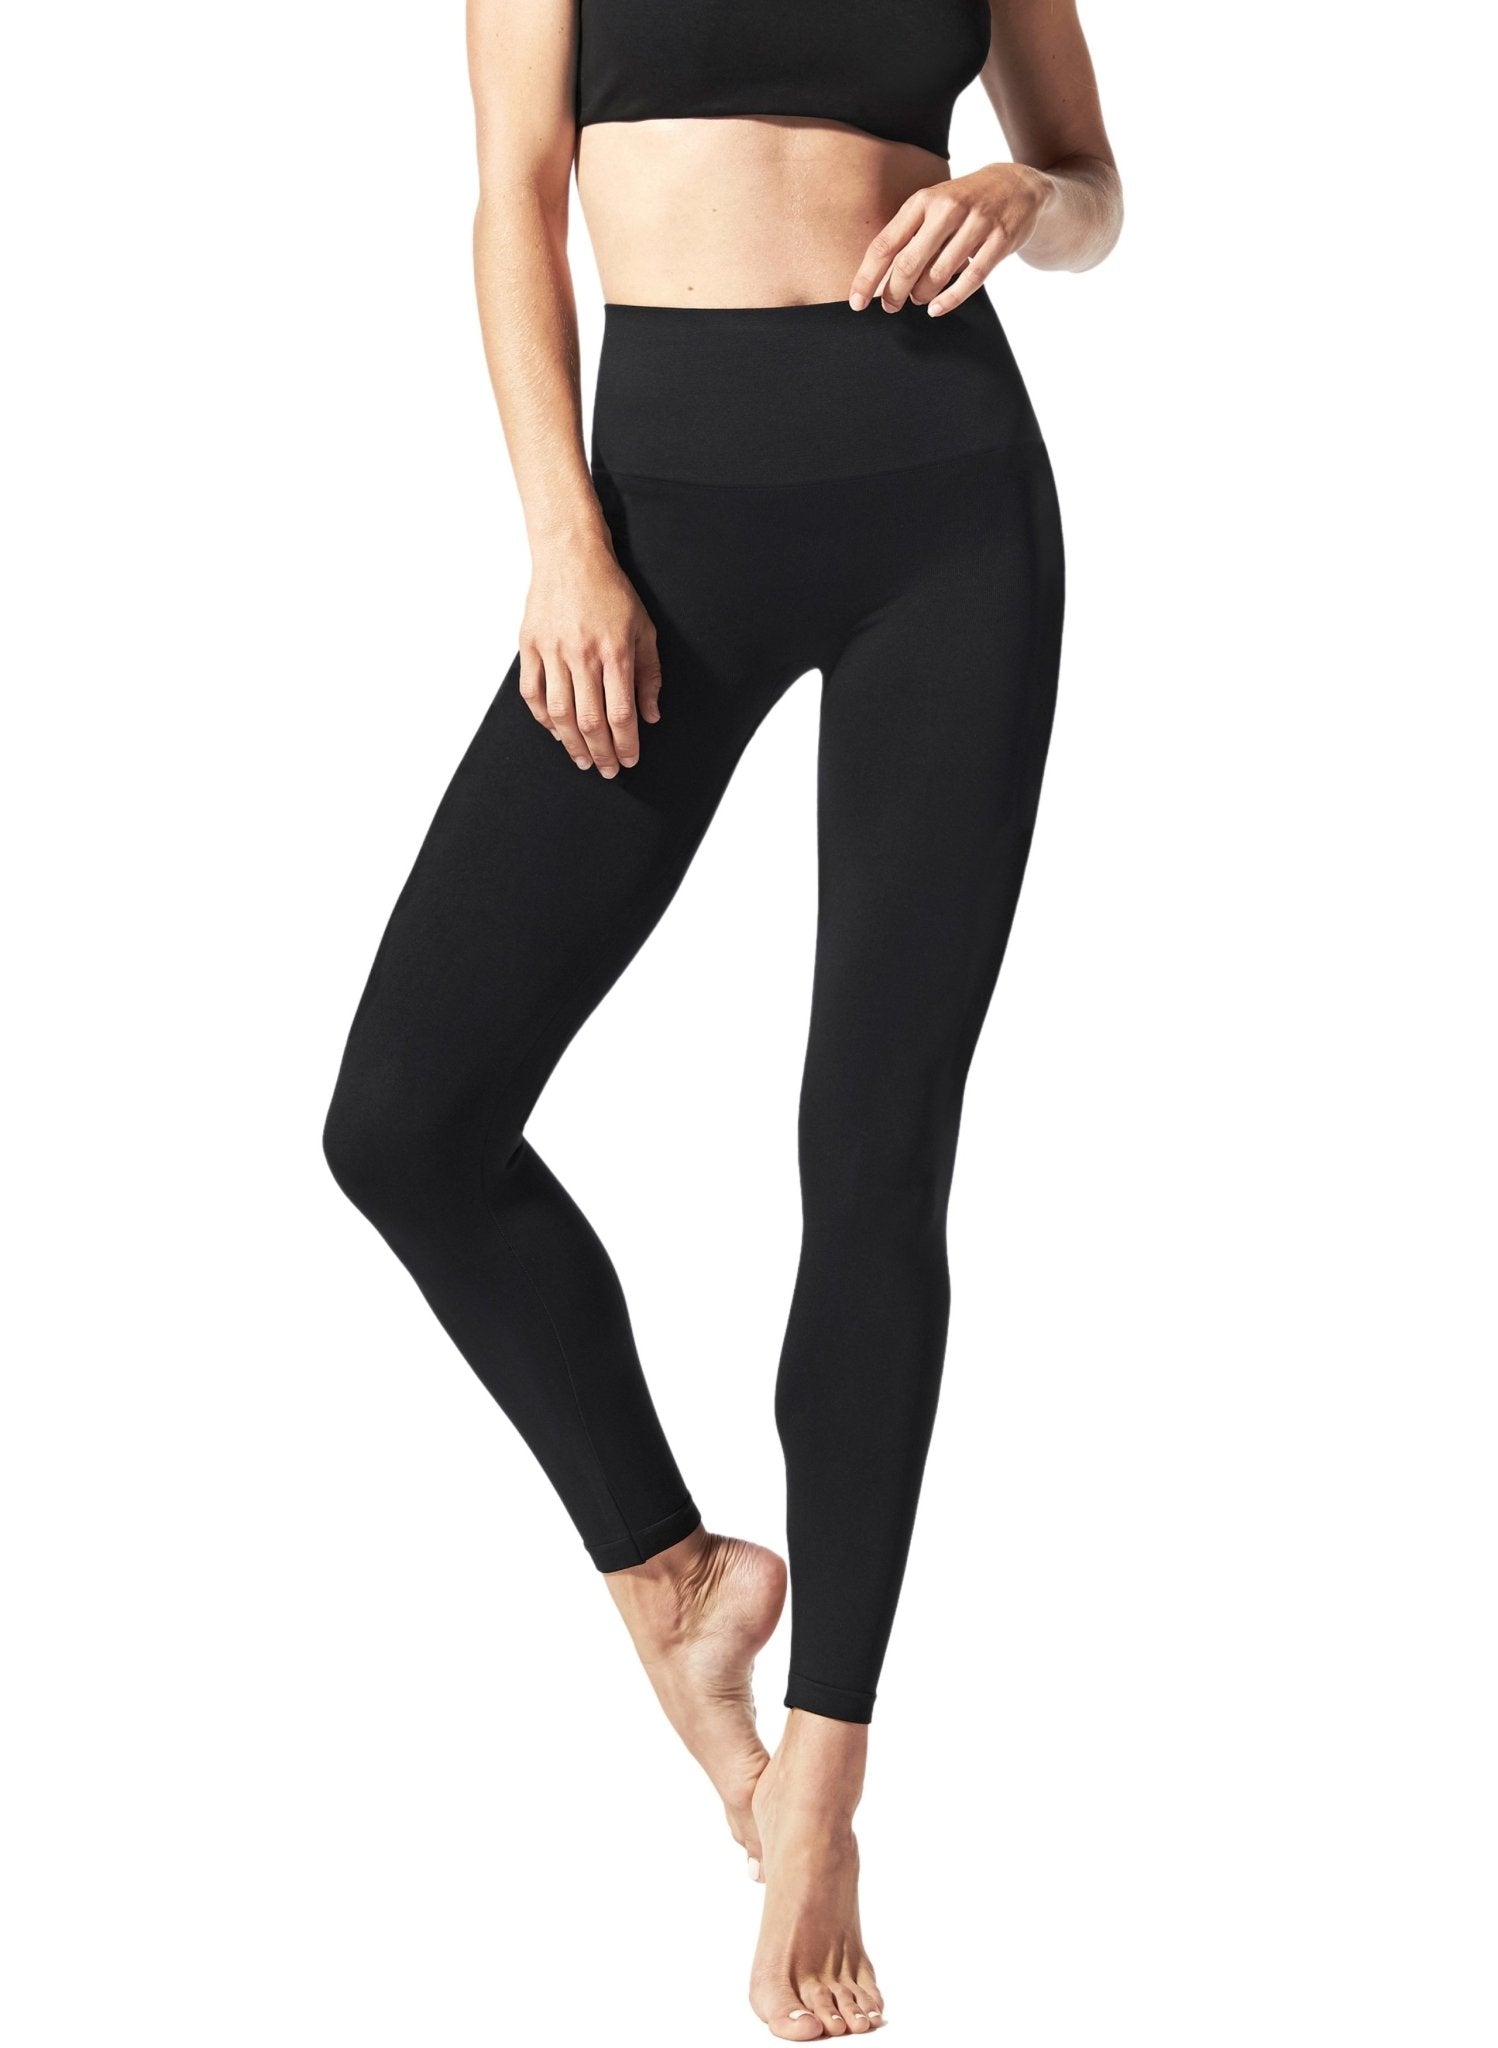 BLANQI Hipster Postpartum Support Leggings - Black - Mums and Bumps